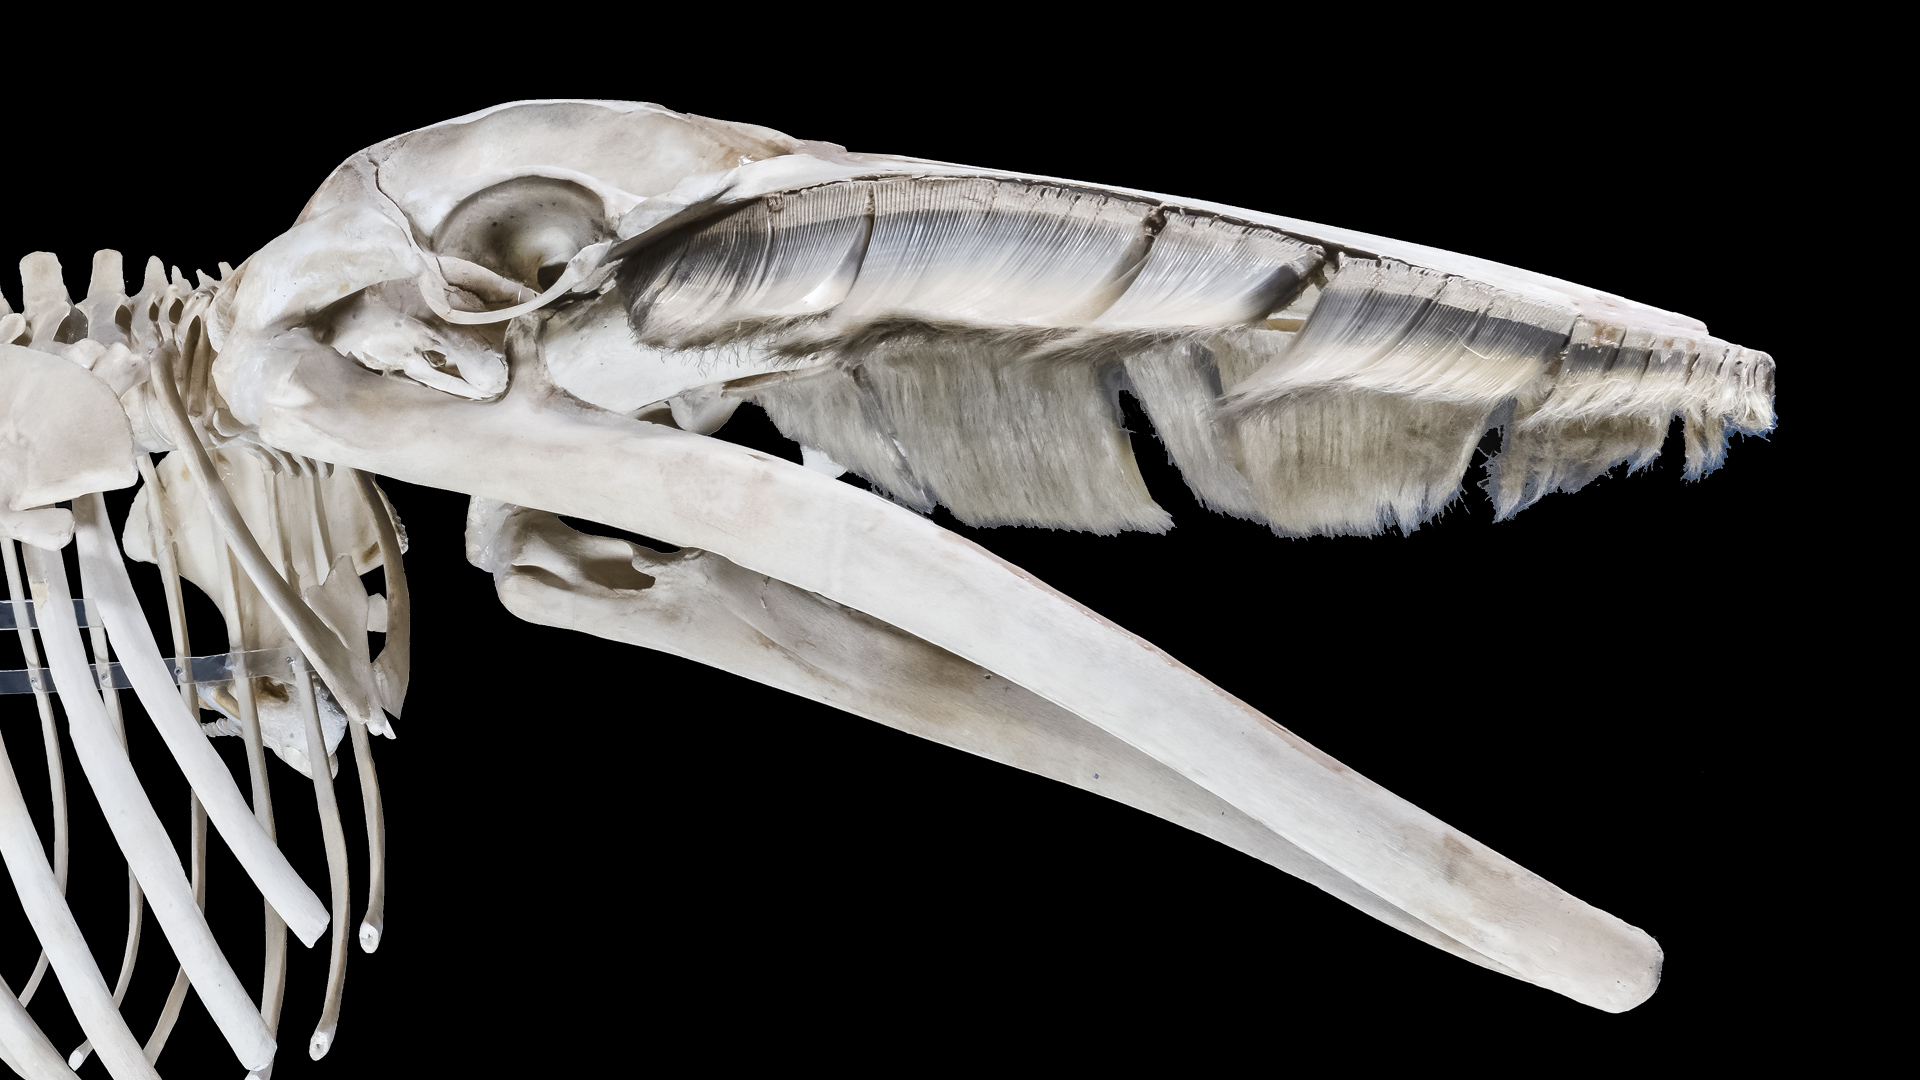 Whale skeleton with short, white baleen on the upper jaw.